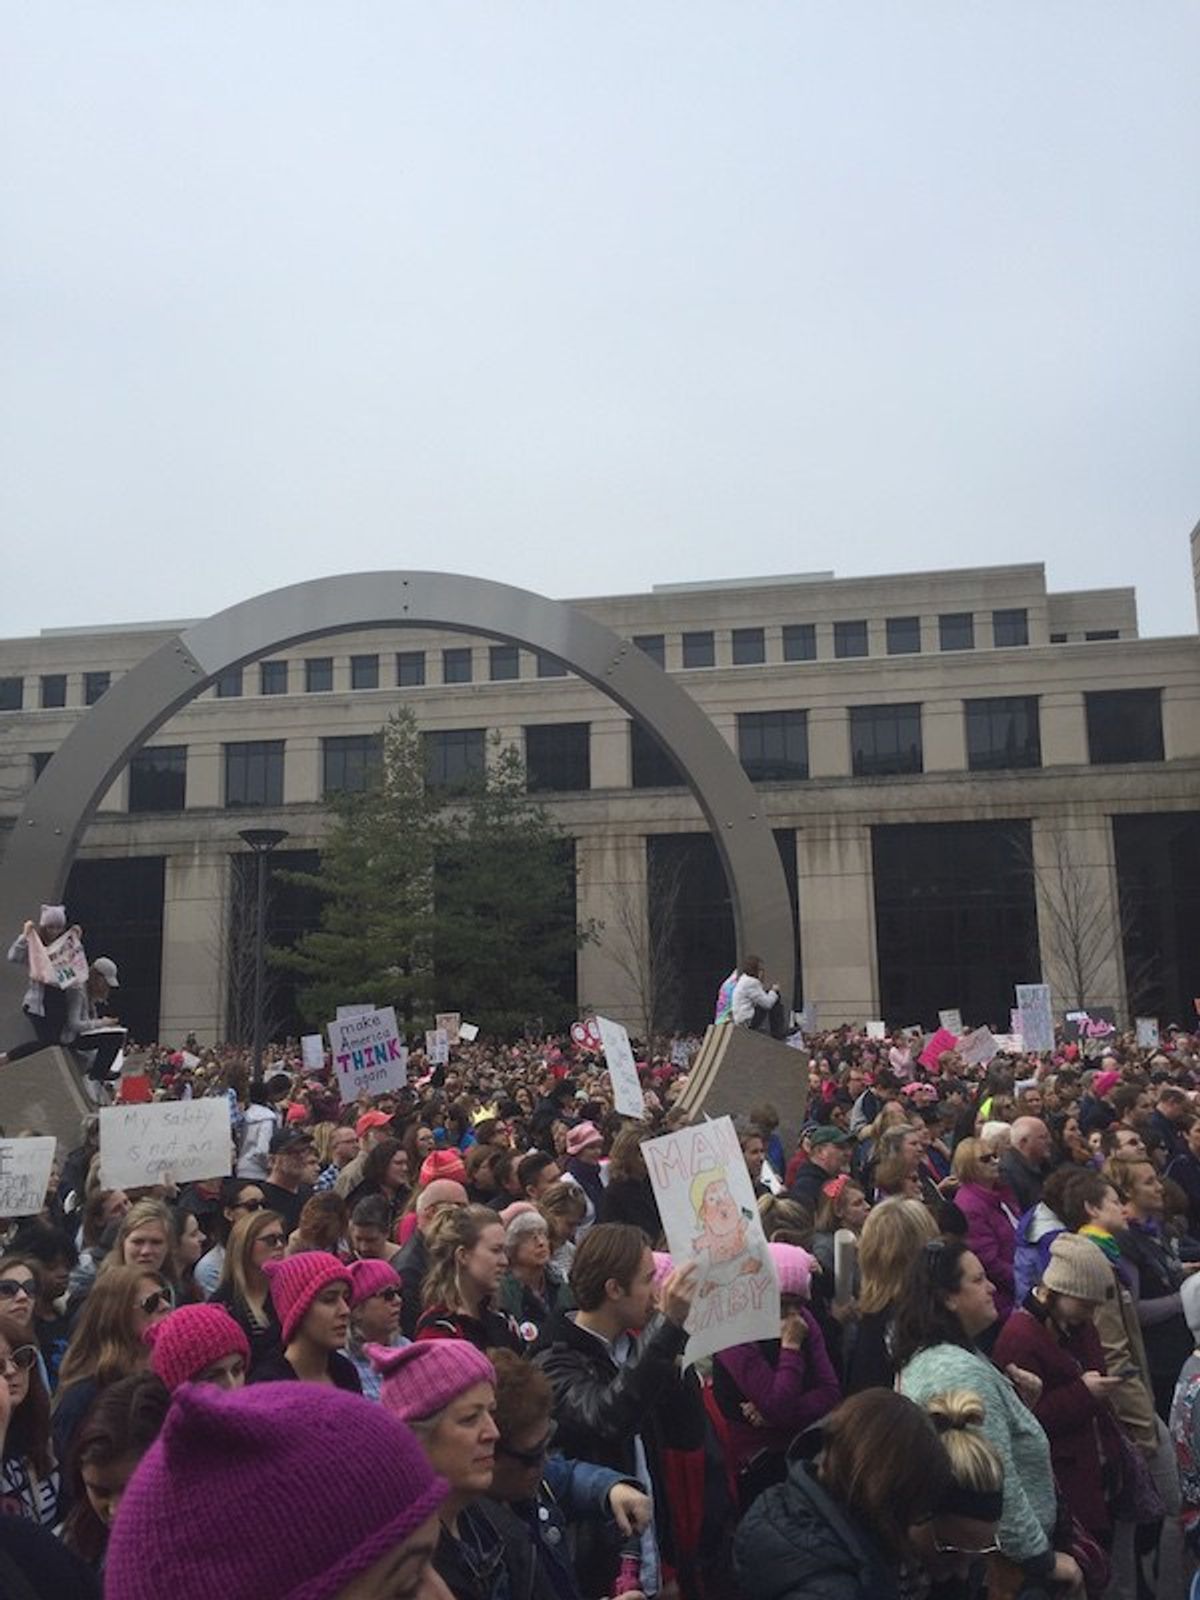 I Attended My First Women's March, And Here's What I Saw